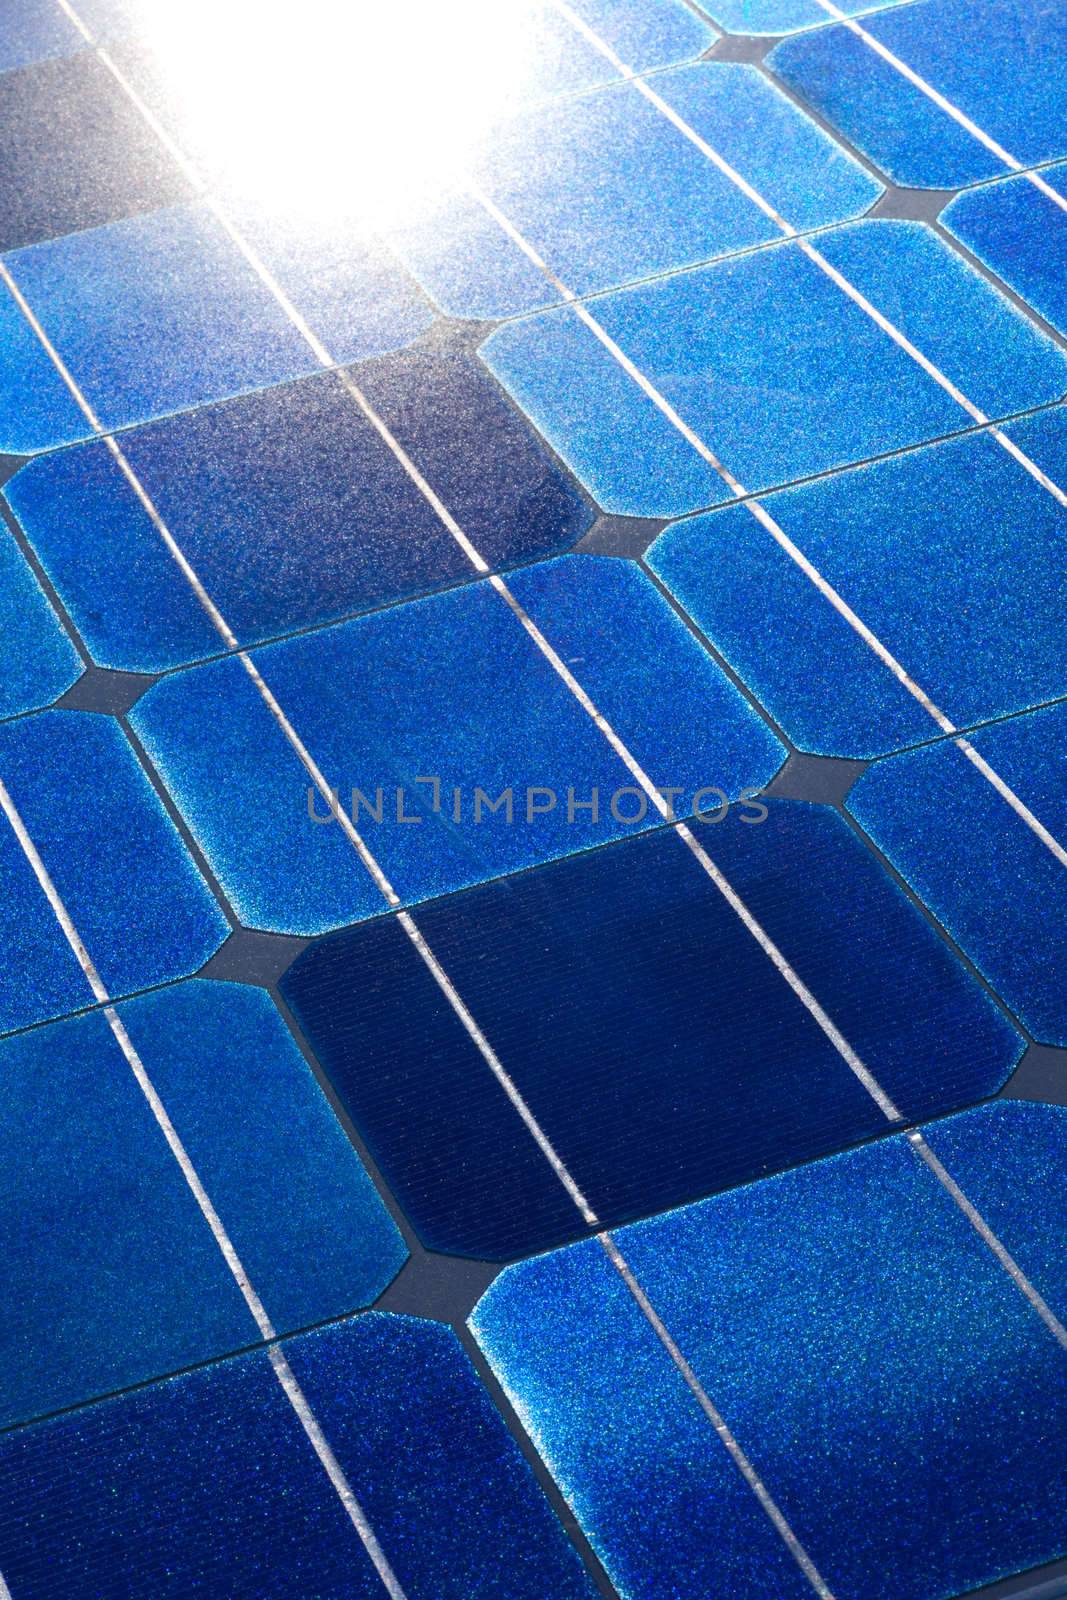 Pattern of solar cell wafers in photovoltaic solar panel with sun glare.